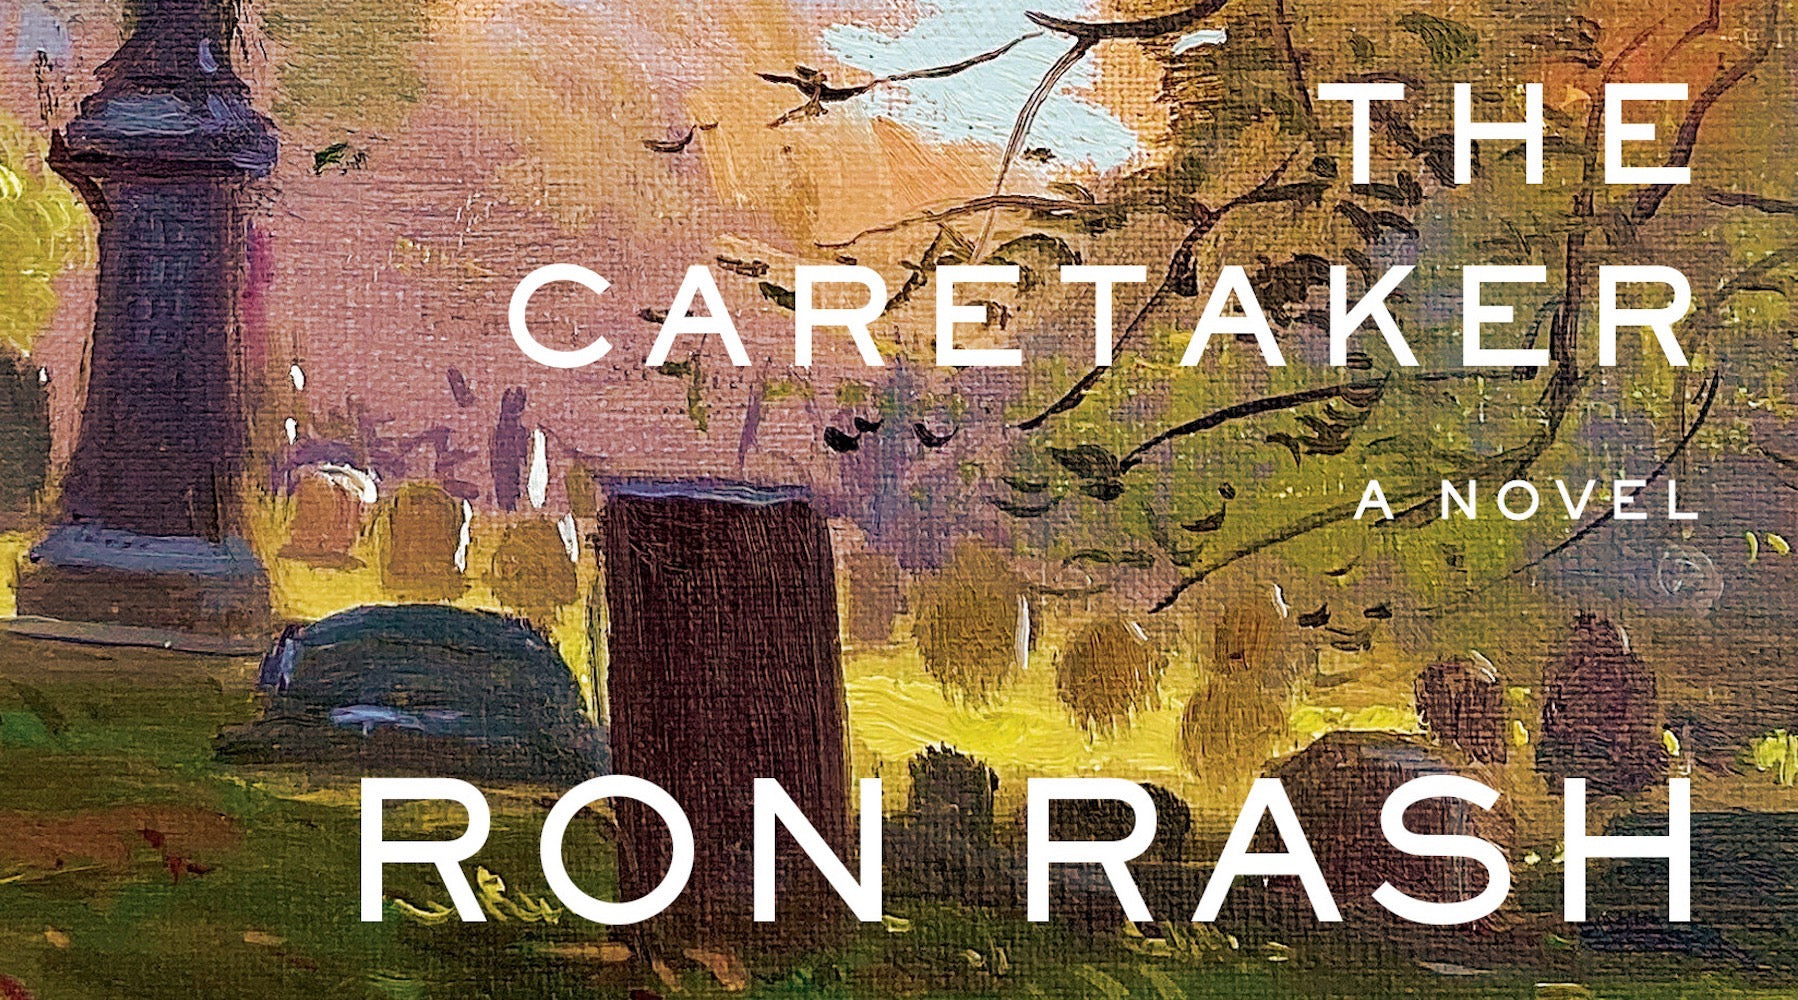 A mysterious tombstone inspired Ron Rash’s new novel, set in N.C. and Korea